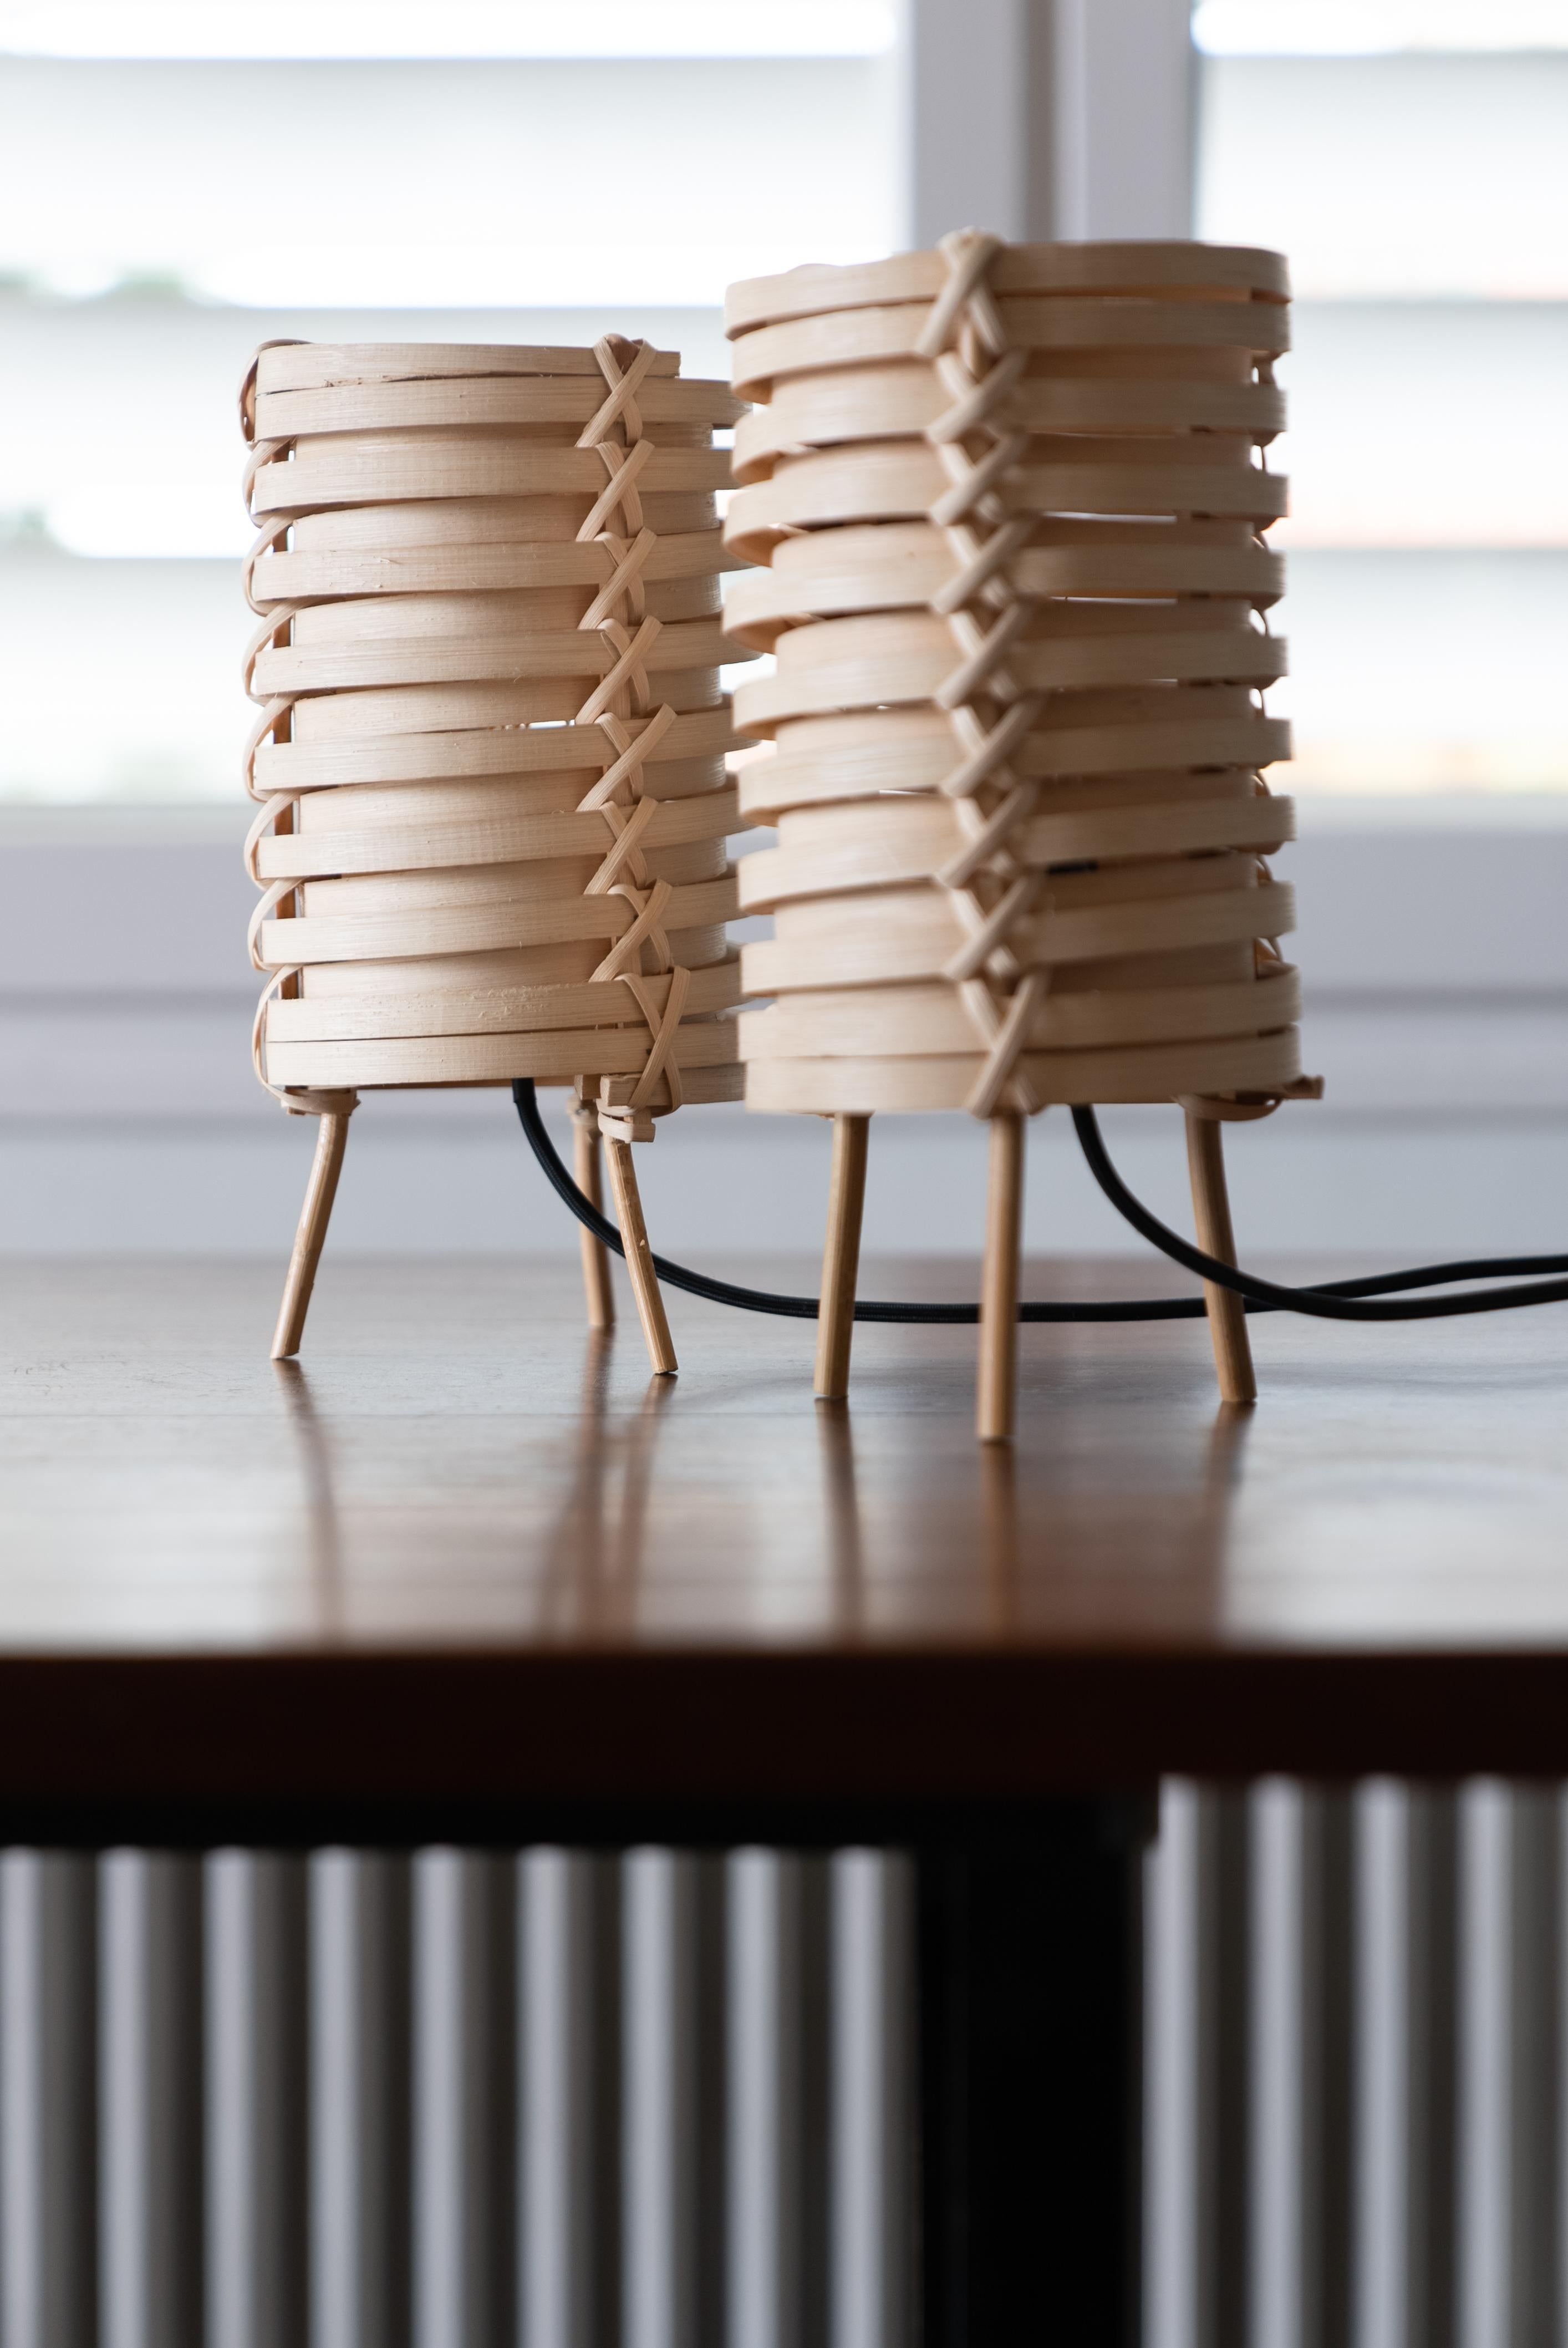 J.A. Coderch 'Junco' Rattan Cane Table Lamp for Tunds For Sale 5